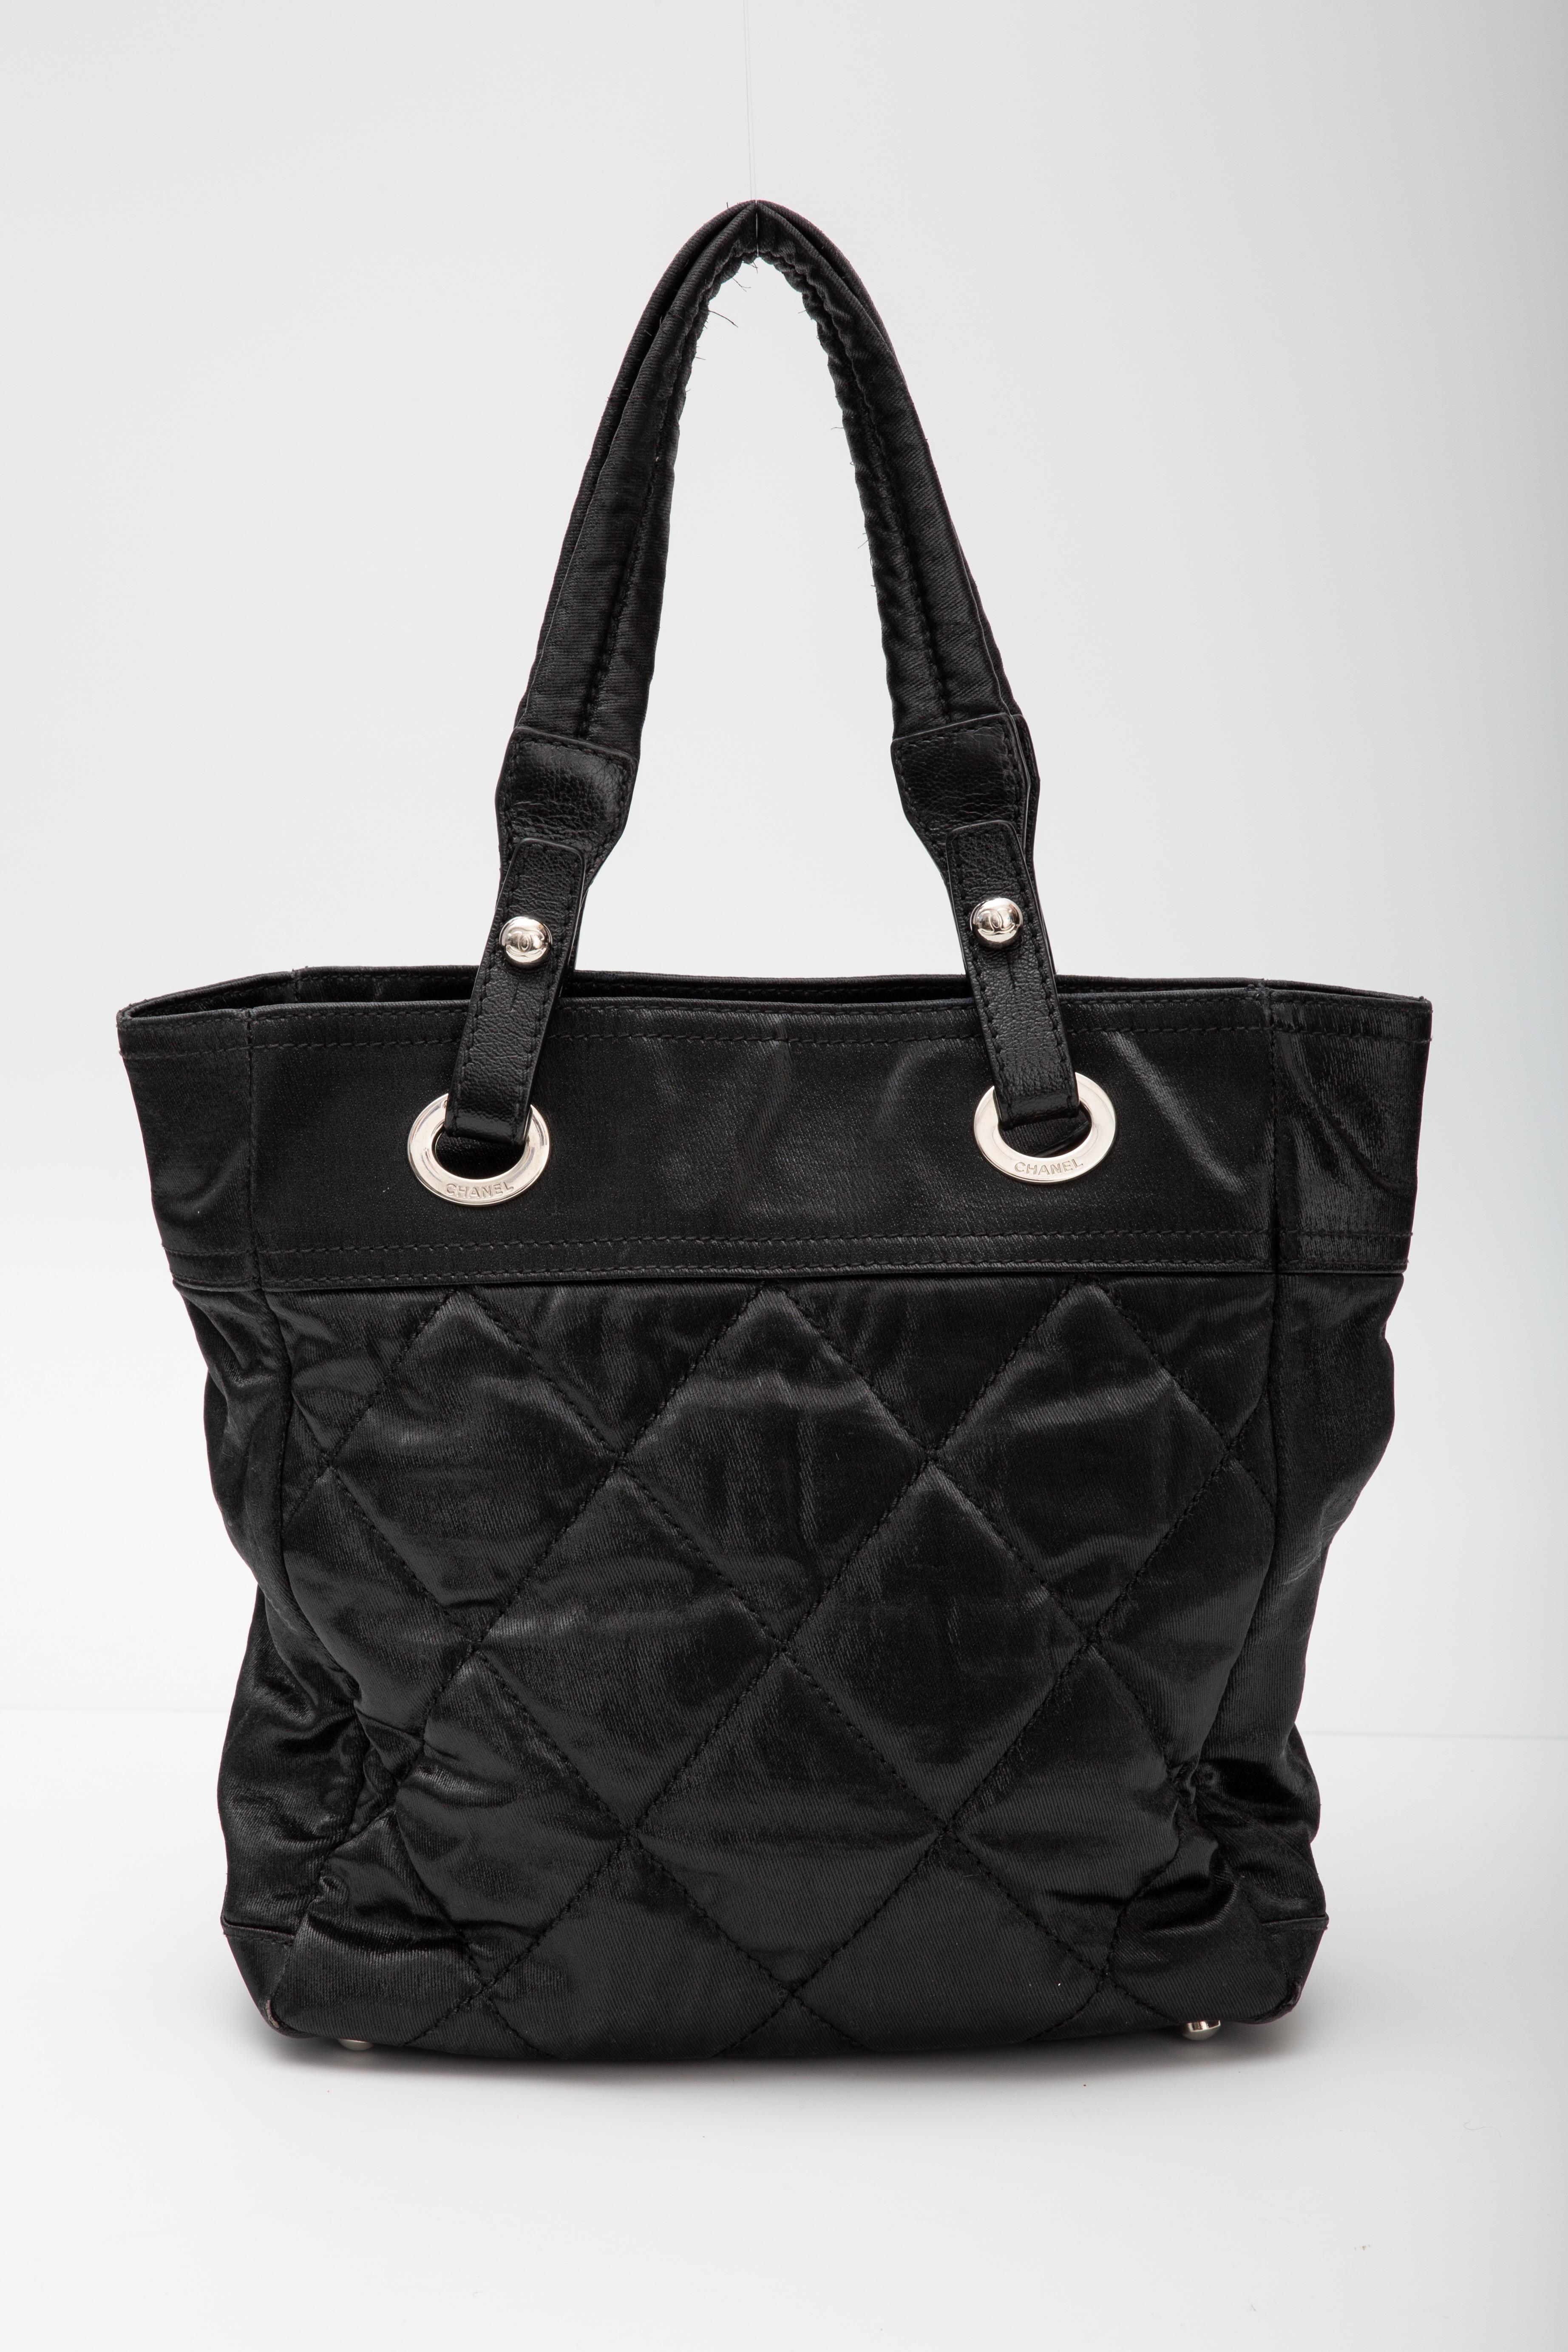 This Chanel tote bag is made of quilted nylon and is from the Spring/Summer 2007 Collection by Karl Lagerfeld. The bag features an interlocking CC Logo charm, a quilted pattern, silver-tone hardware, dual shoulder straps, protective feet at base 